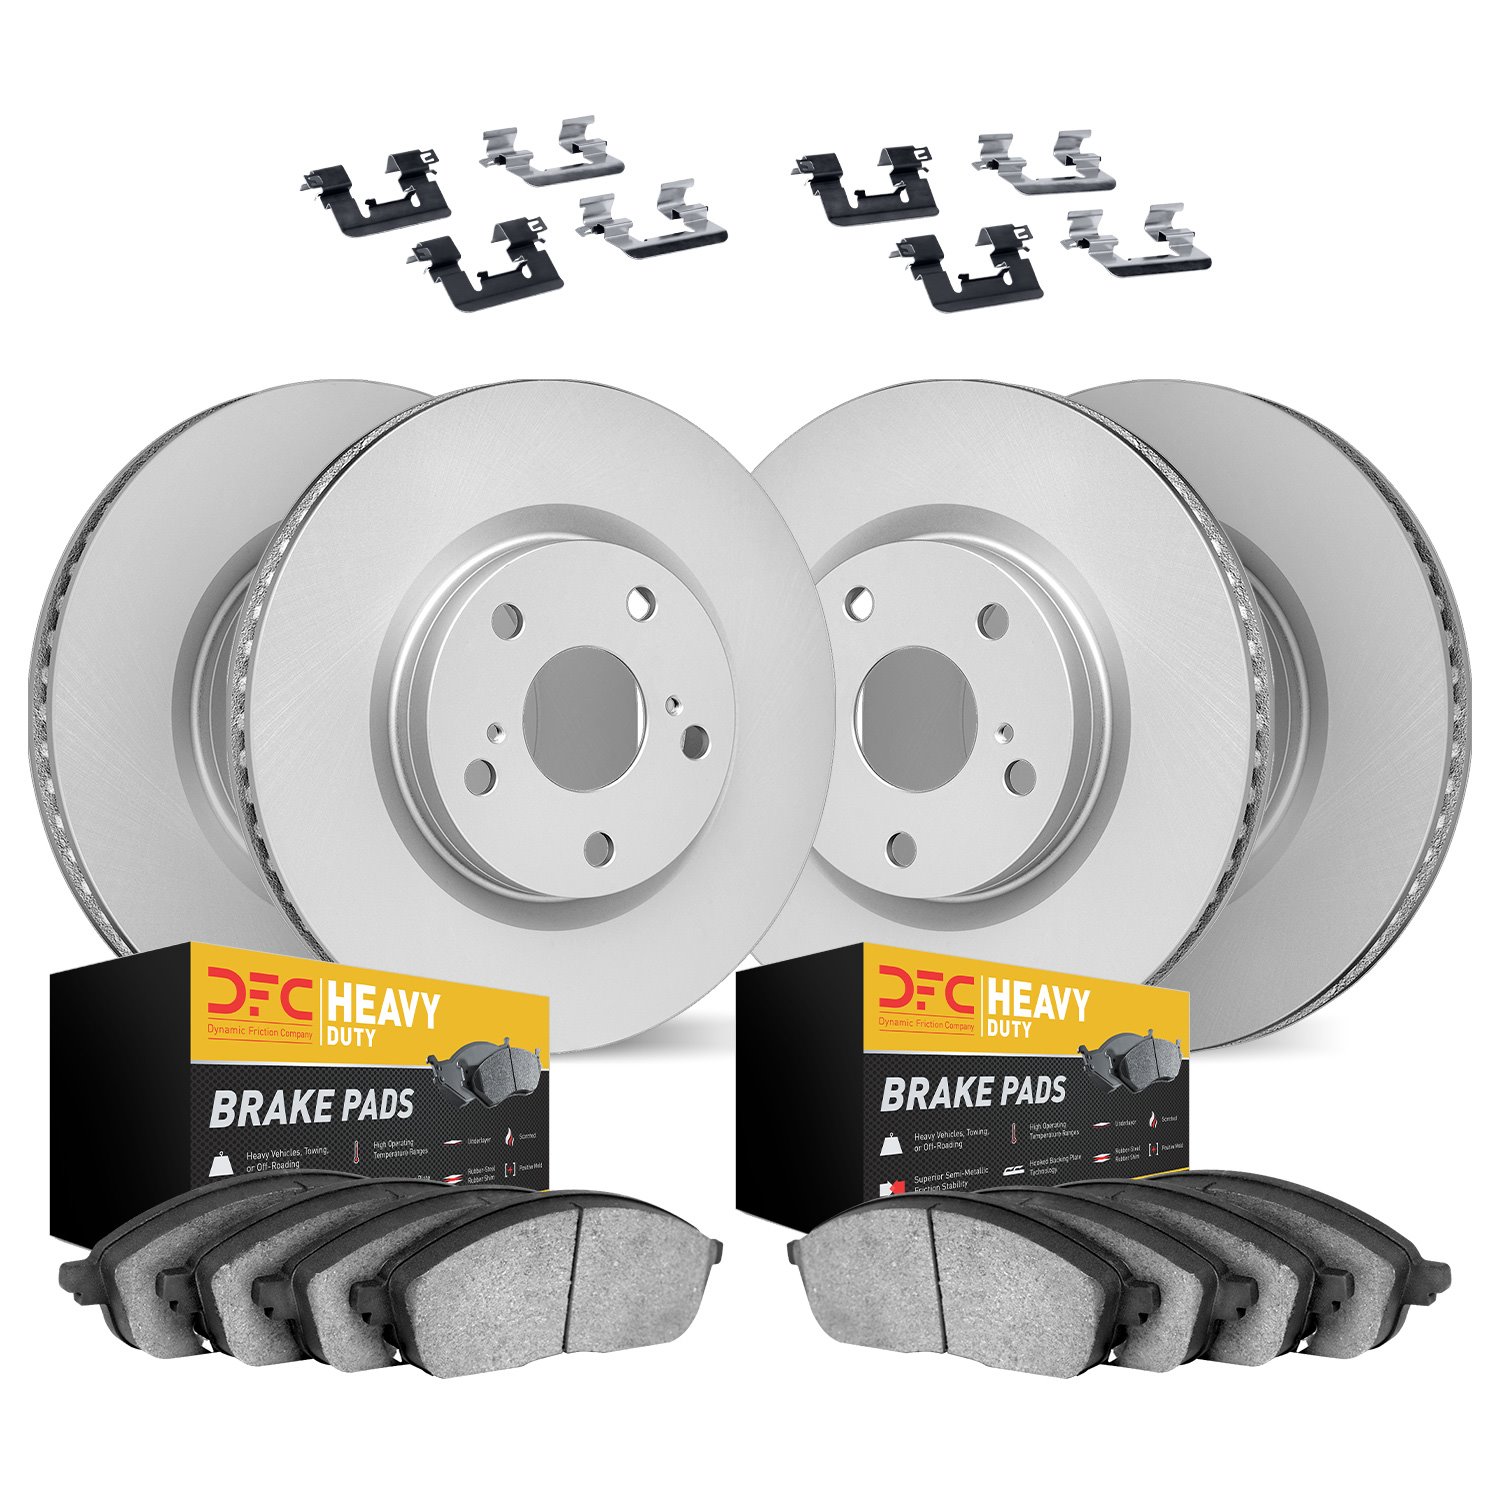 4214-55004 Geospec Brake Rotors w/Heavy-Duty Brake Pads & Hardware, 2003-2011 Ford/Lincoln/Mercury/Mazda, Position: Front and Re